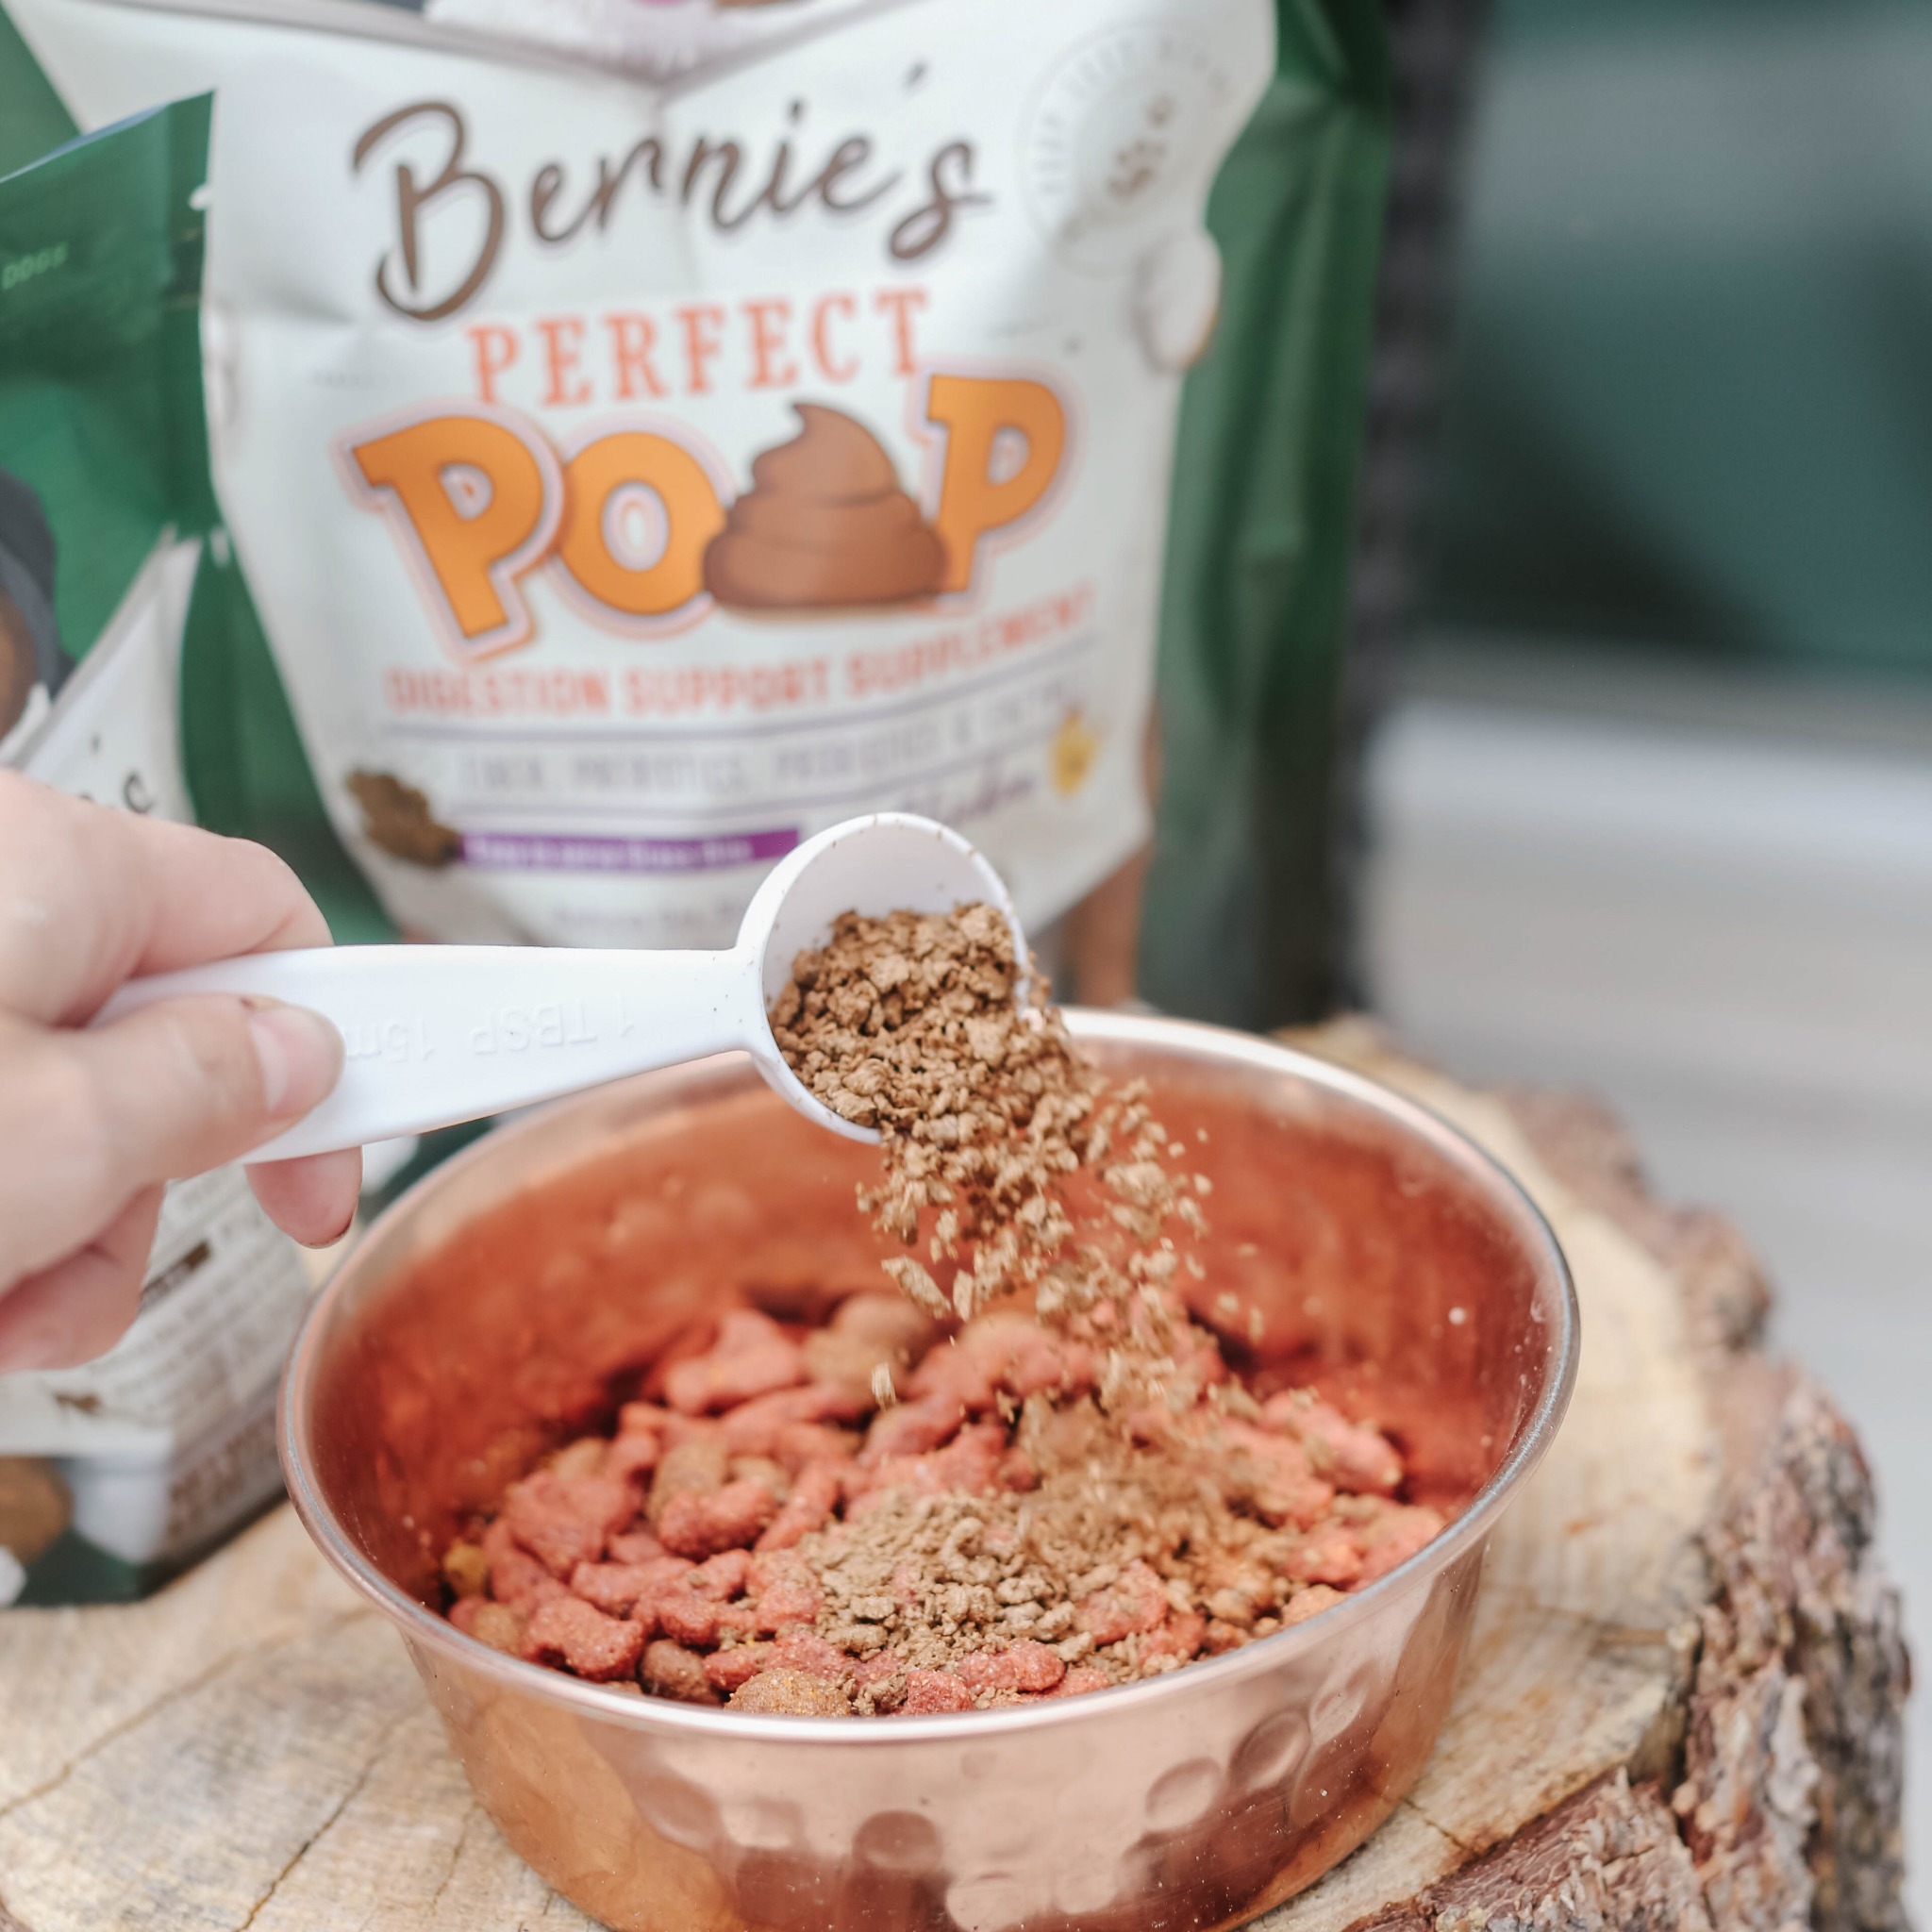 Photo: A person scoops Bernie's Perfect Poop into their dog's food bowl.